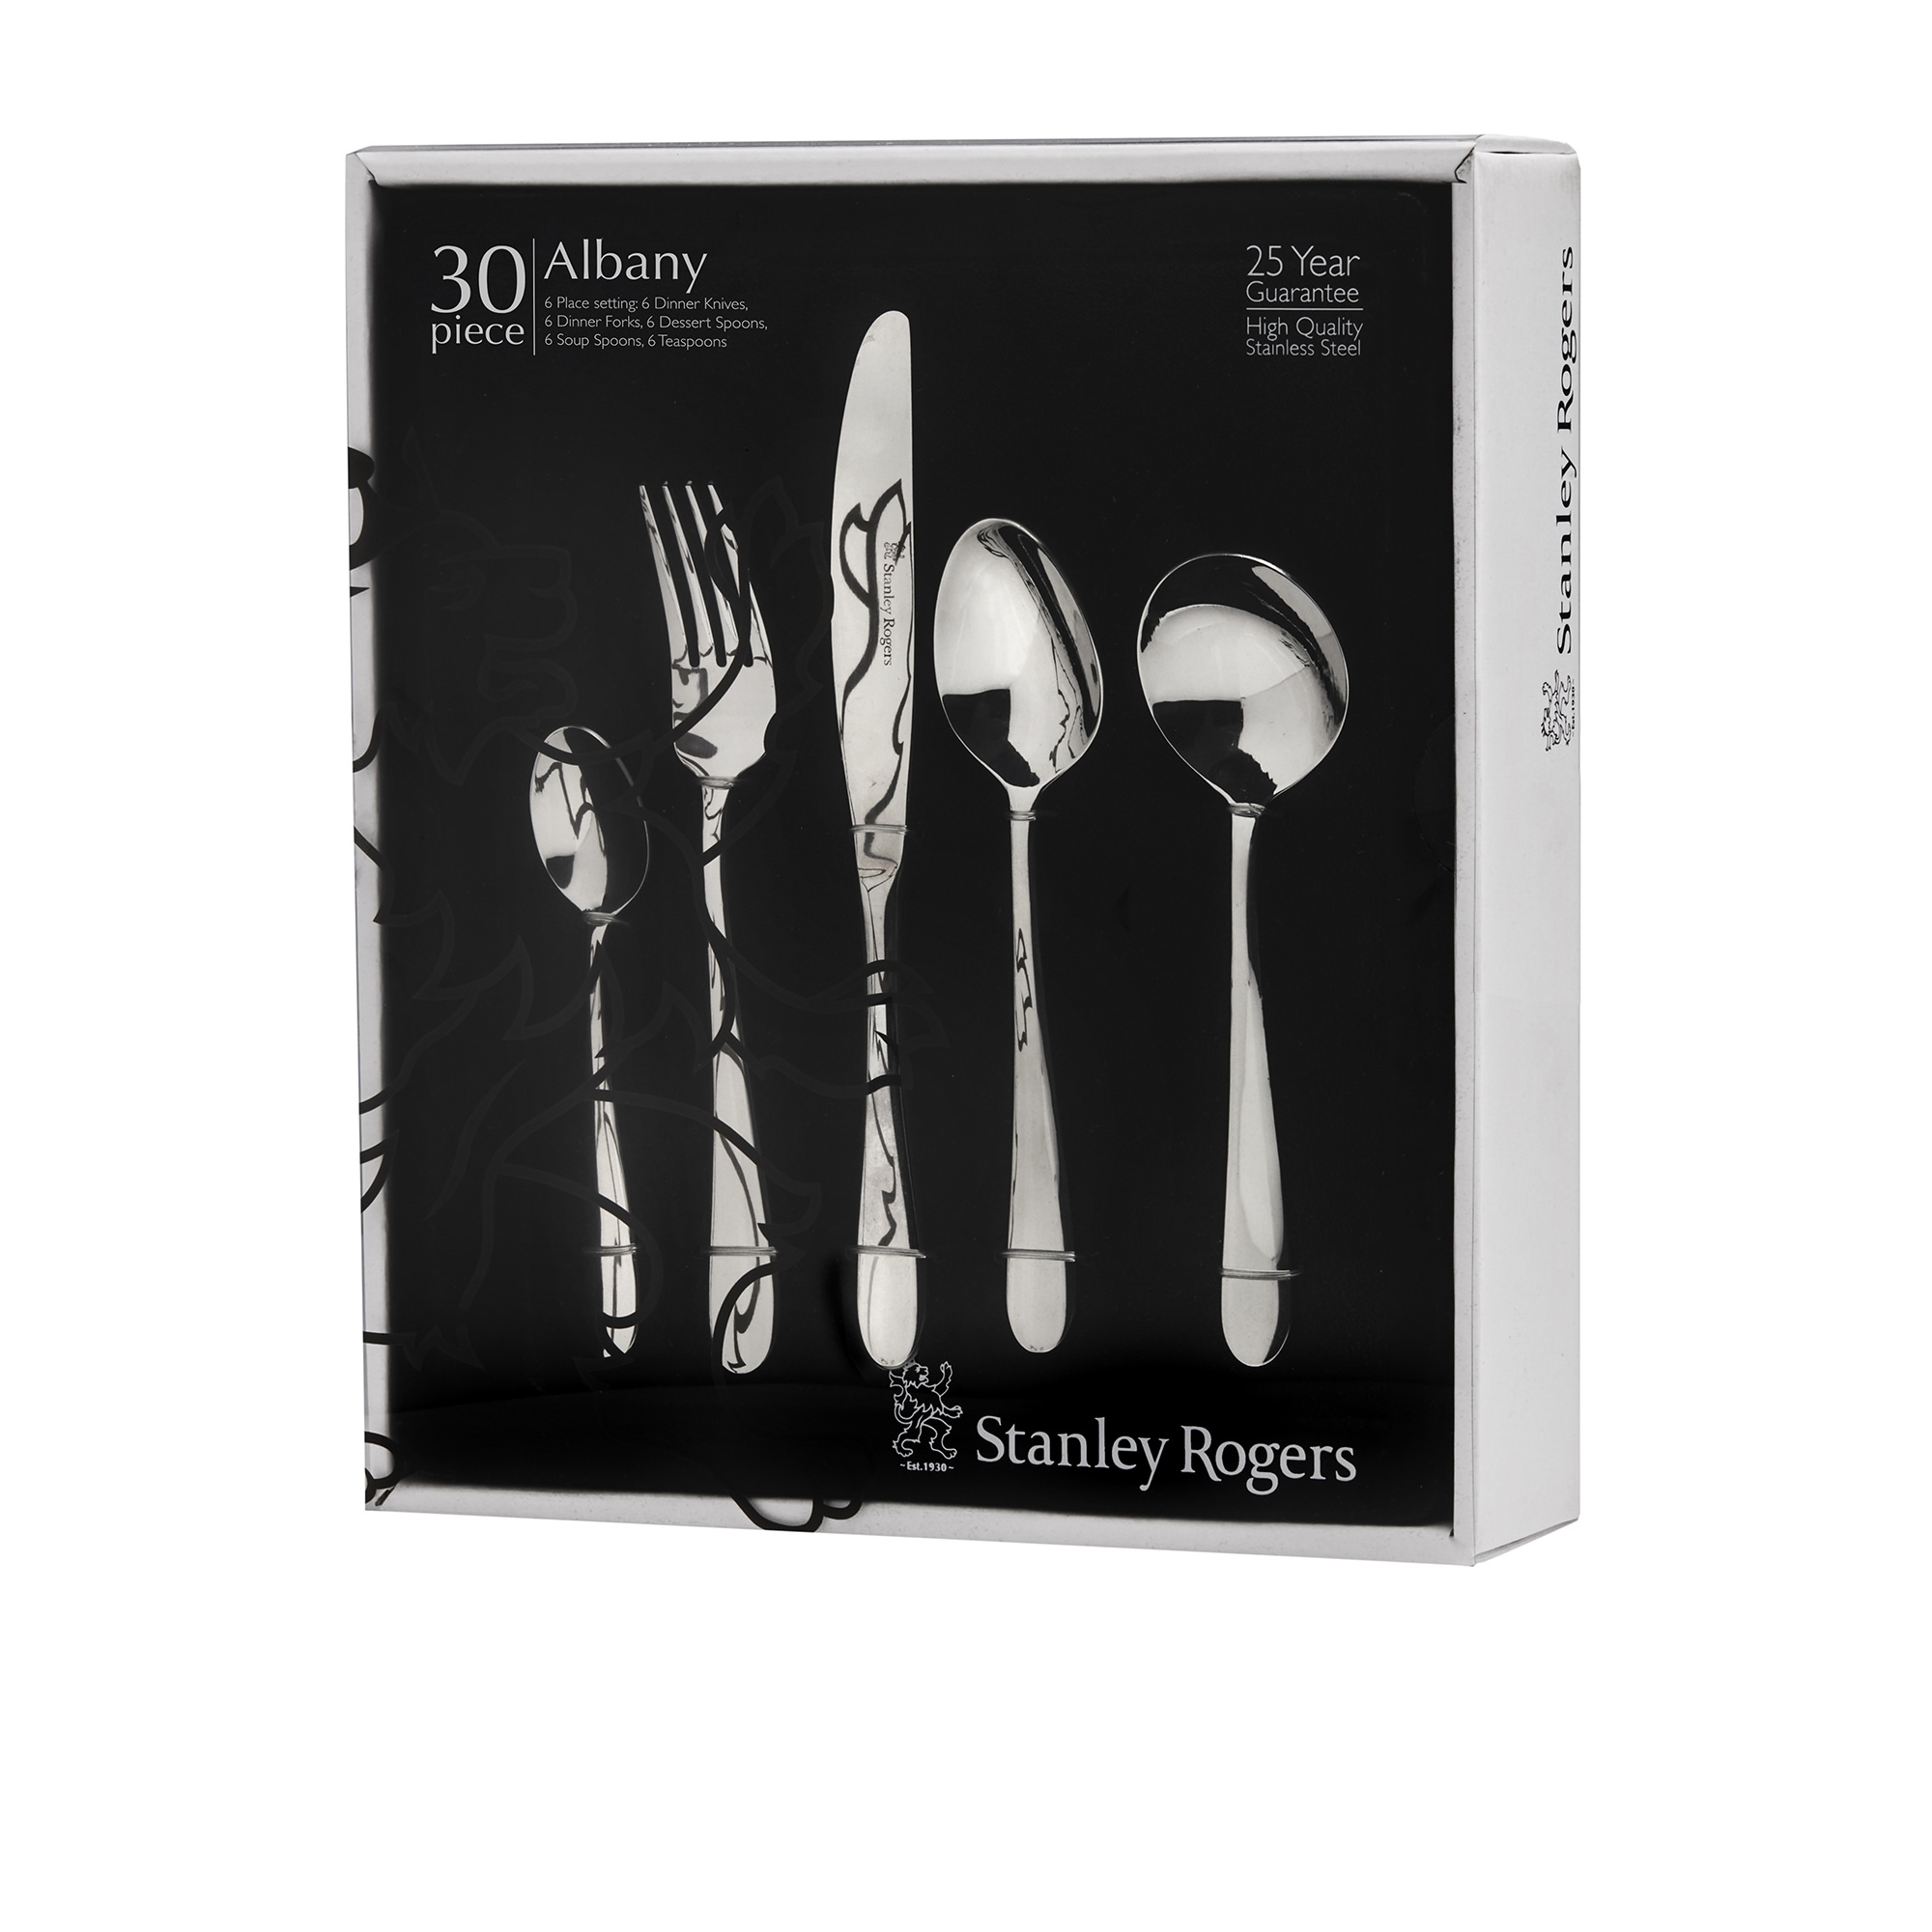 Stanley Rogers Albany Cutlery Set 30pc Image 2